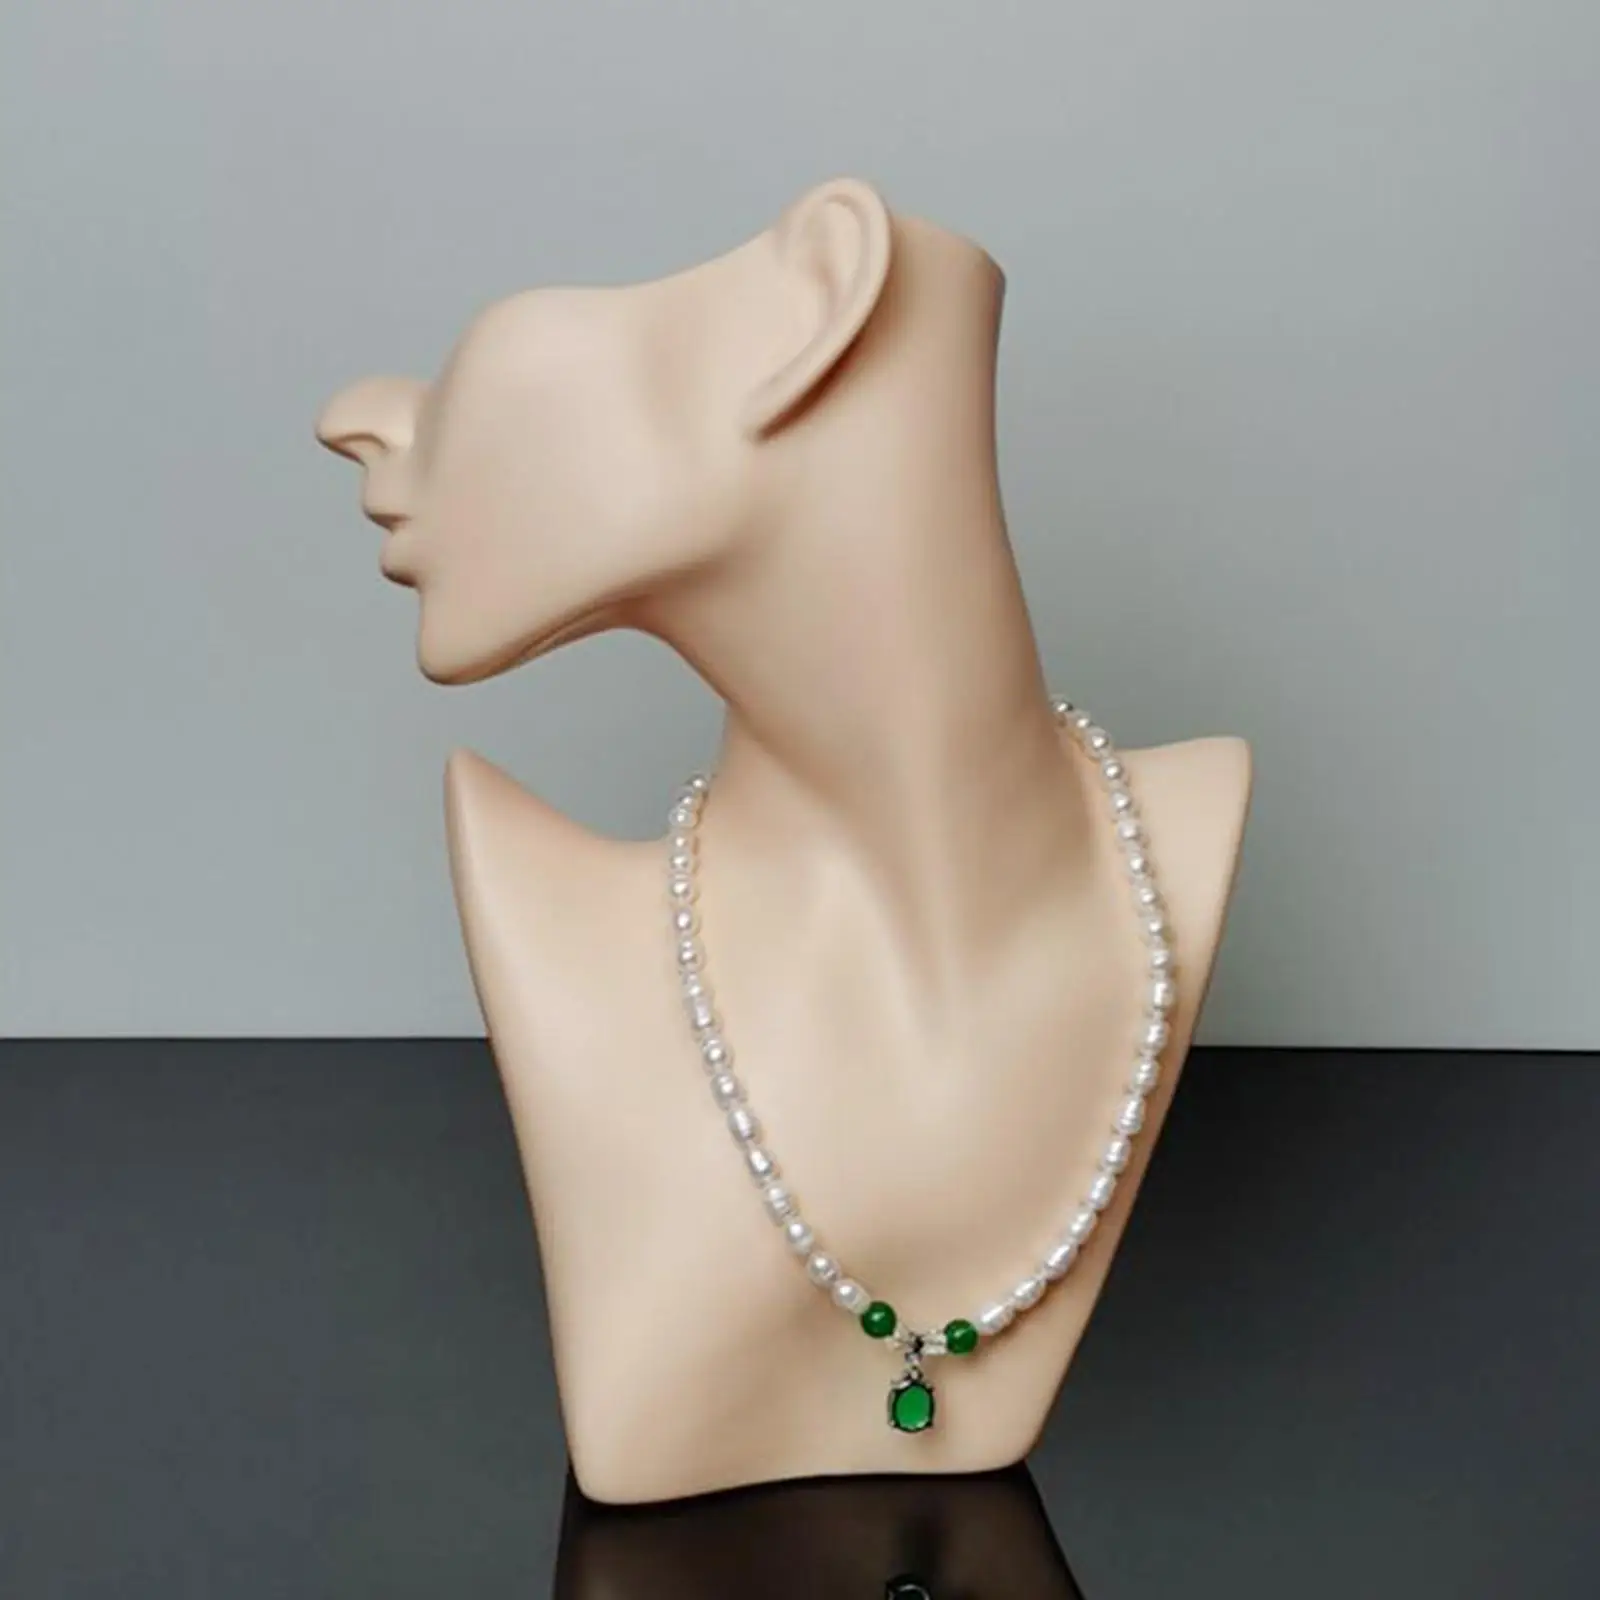 Necklace Jewelry Display Jewelry Stand Half Face Jewelry Mannequin Display Earring Display Stands for Chain Earring Bracelets